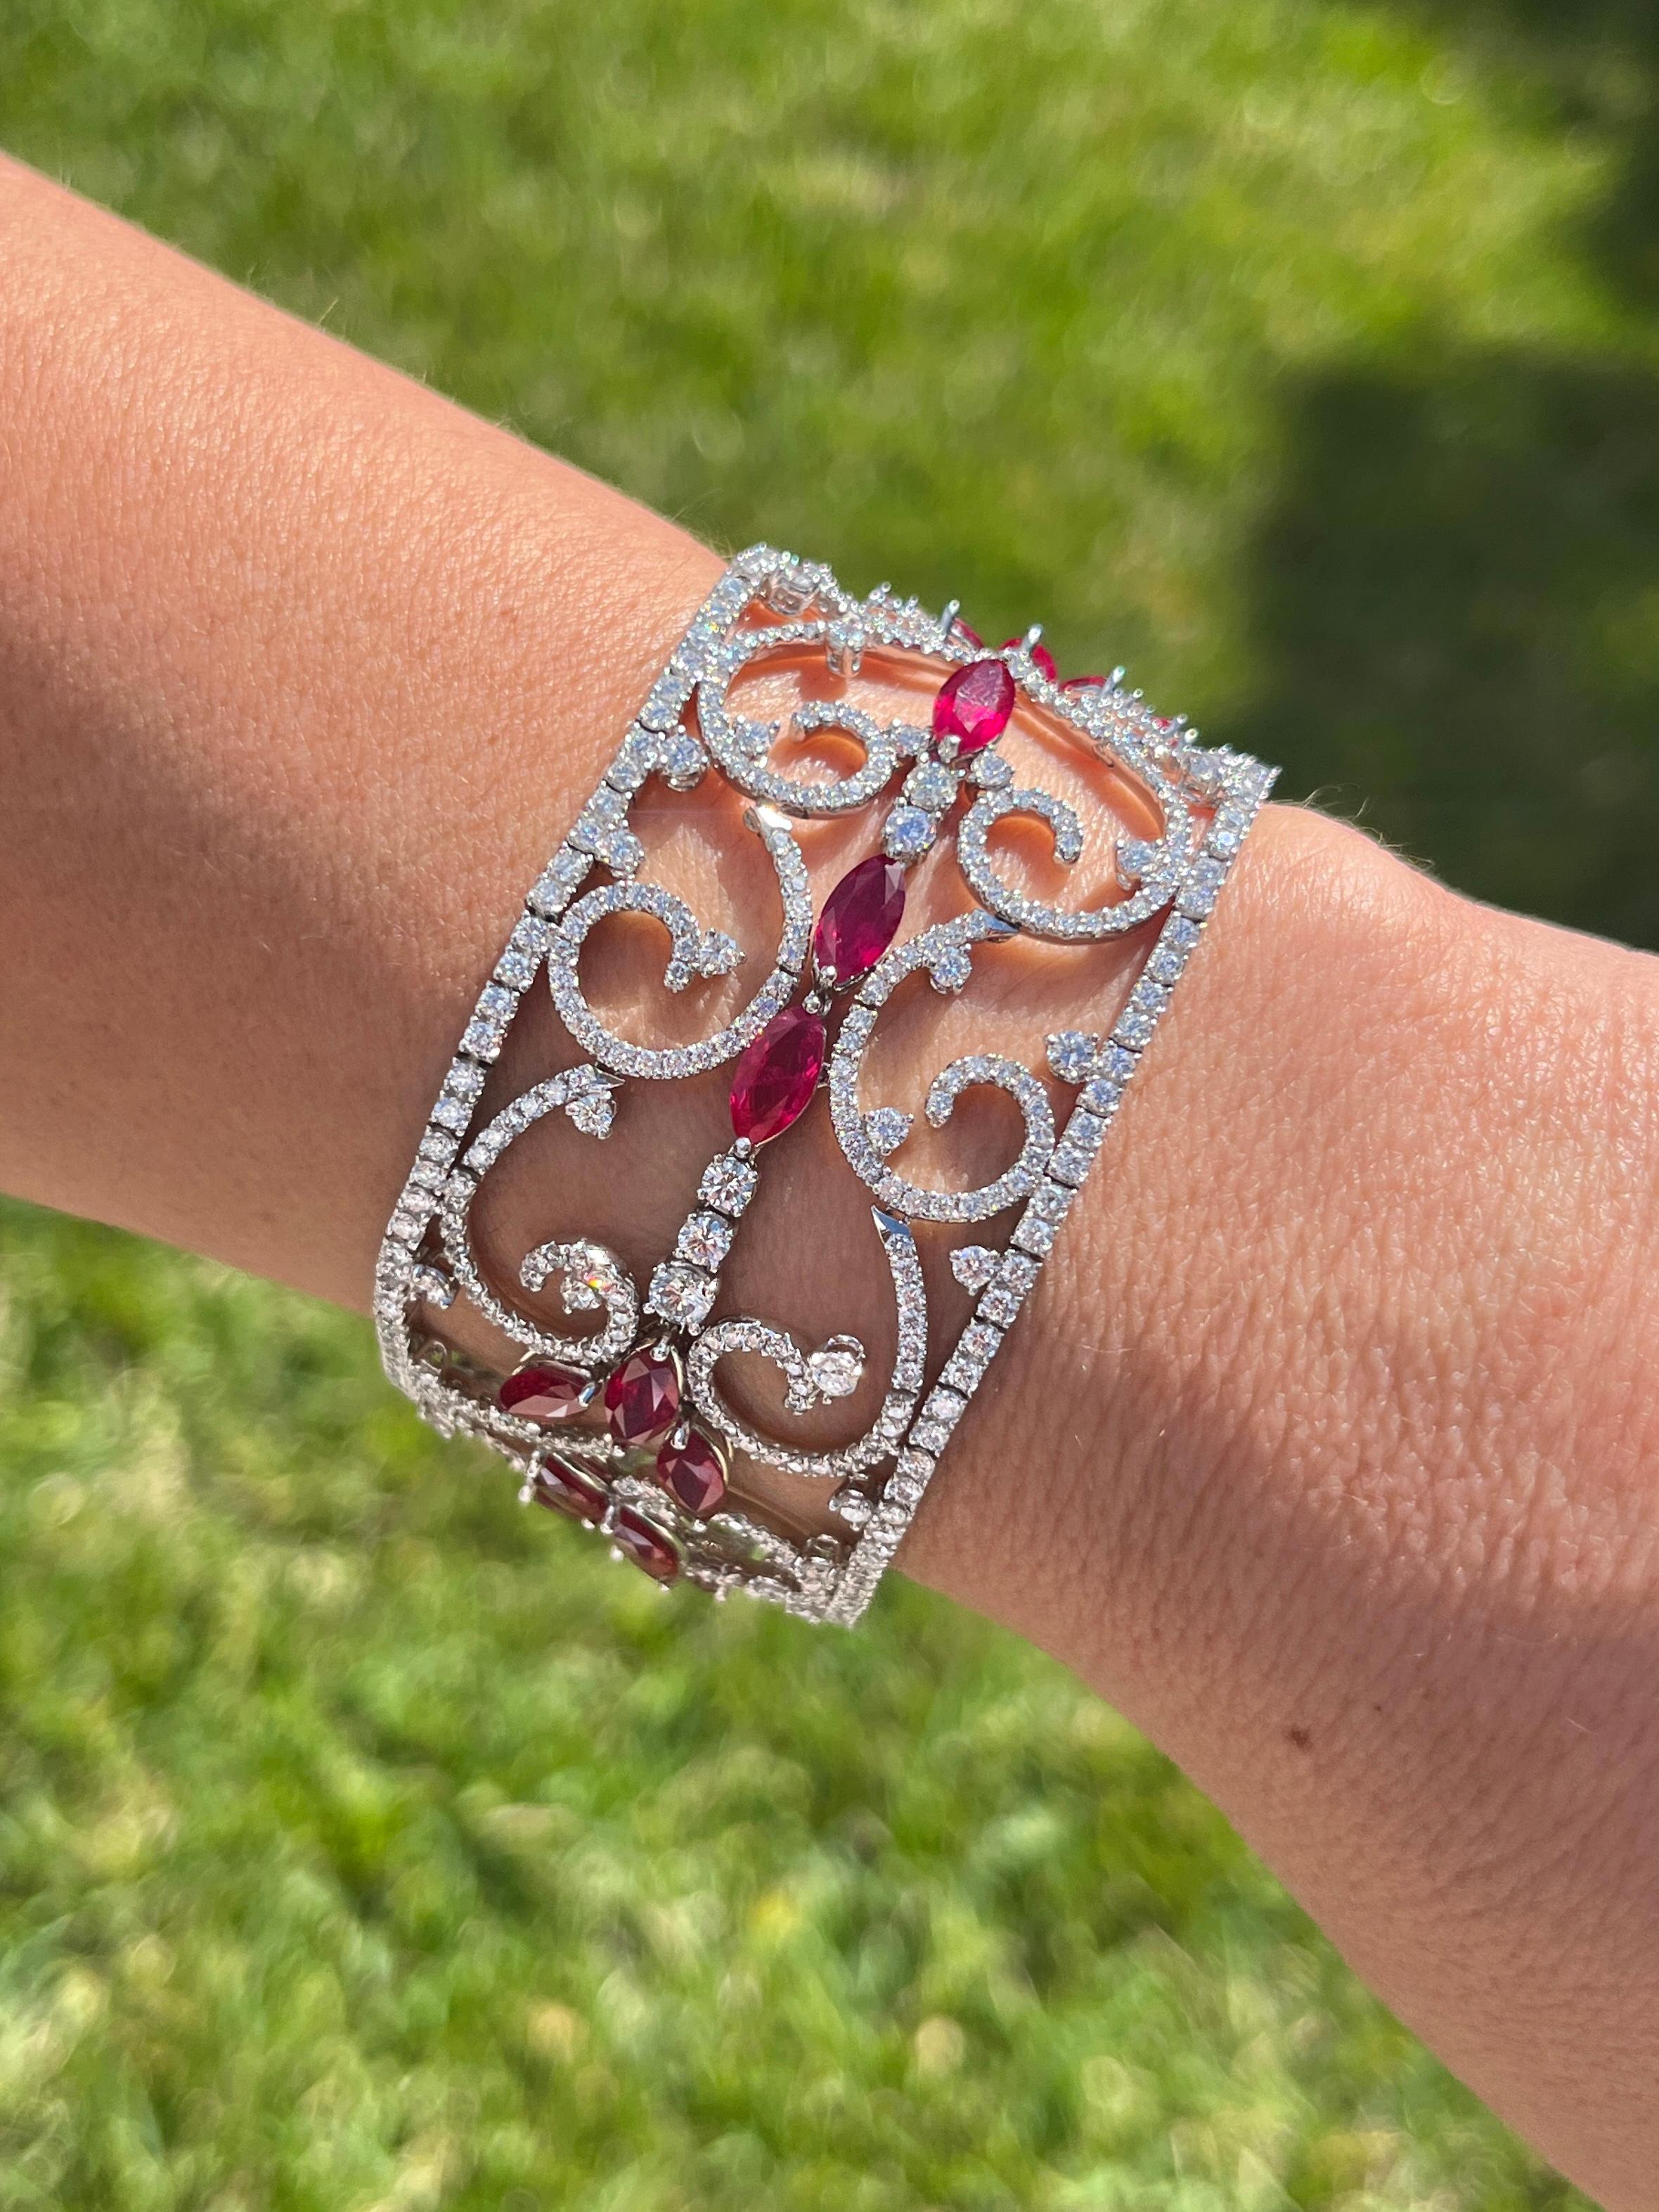 Vintage 46 Carat Ruby & Diamond Filigree Floral Motif Bracelet in 18k White Gold In Excellent Condition For Sale In Miami, FL